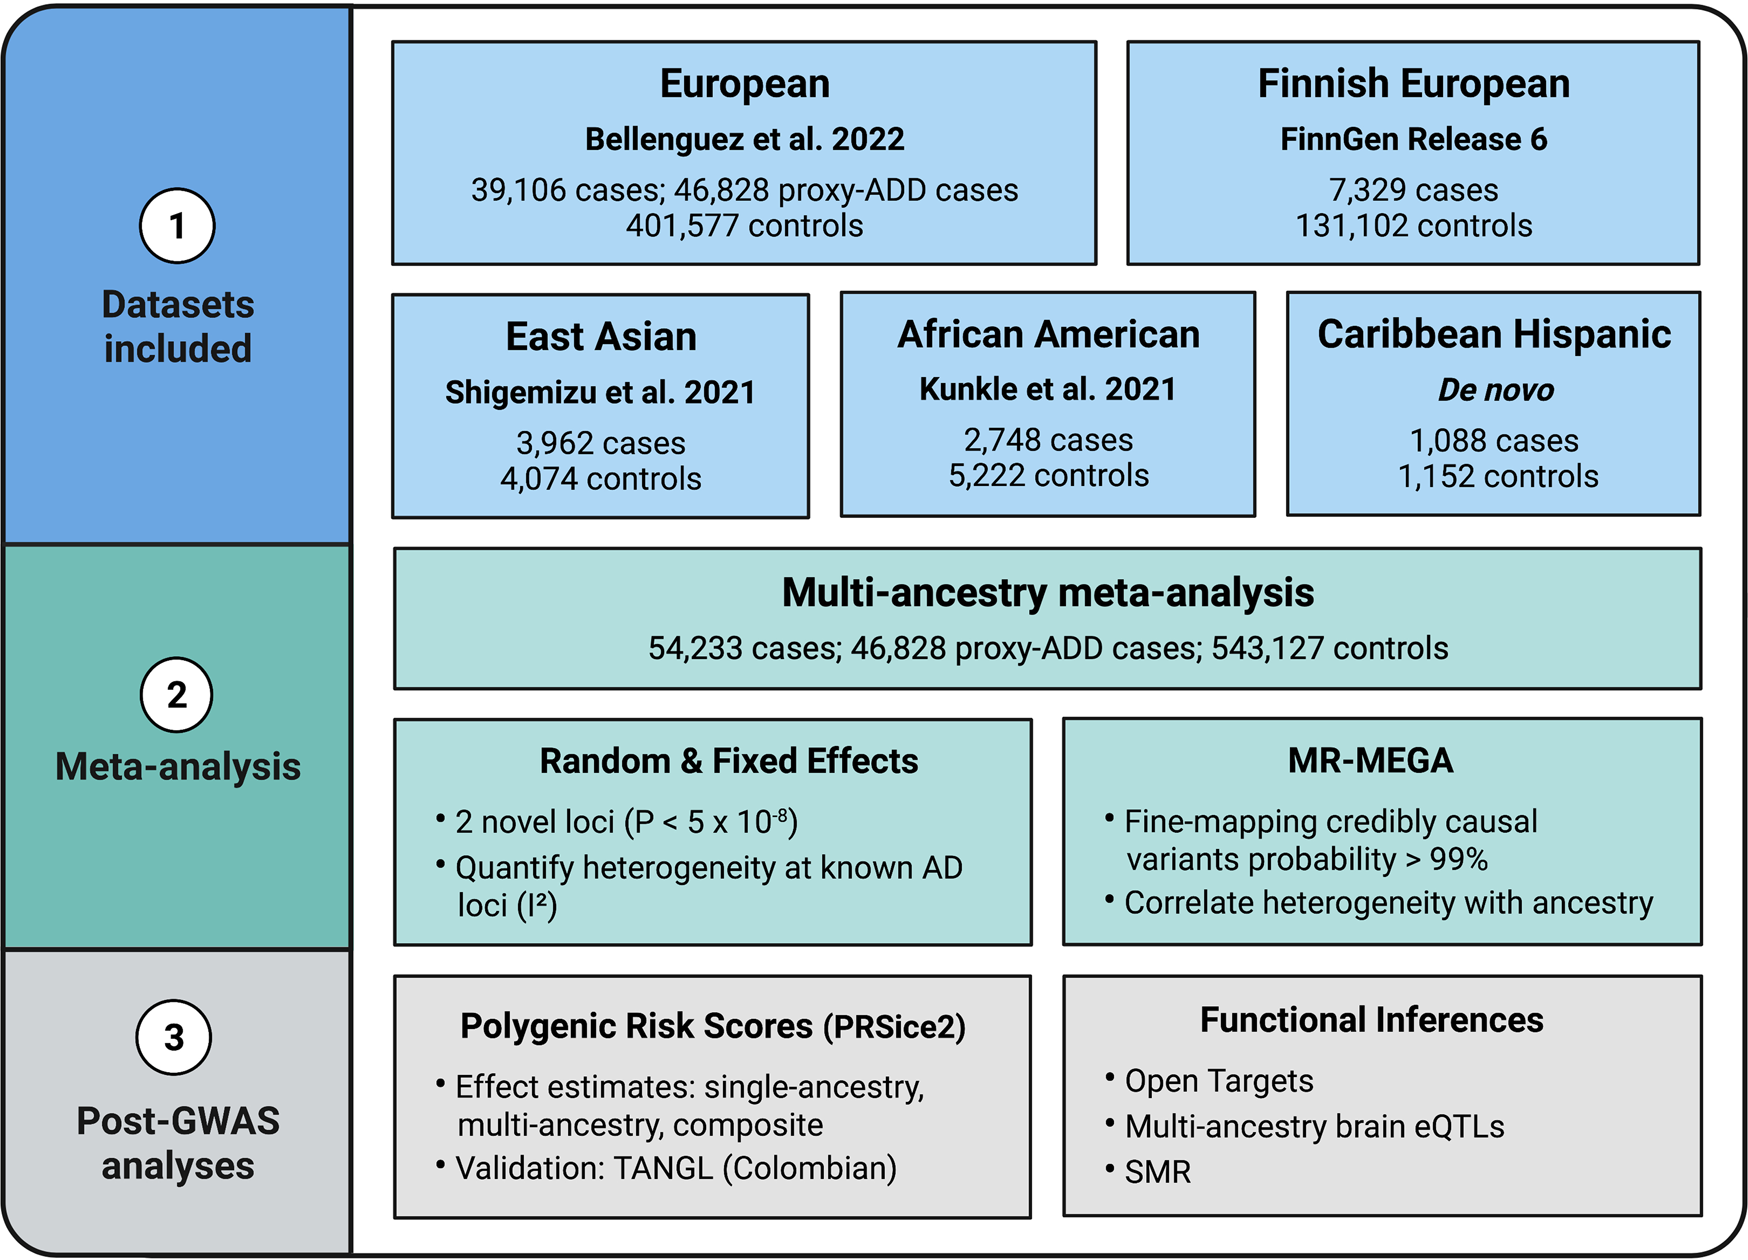 New insights into the genetic etiology of Alzheimer's disease and related  dementias